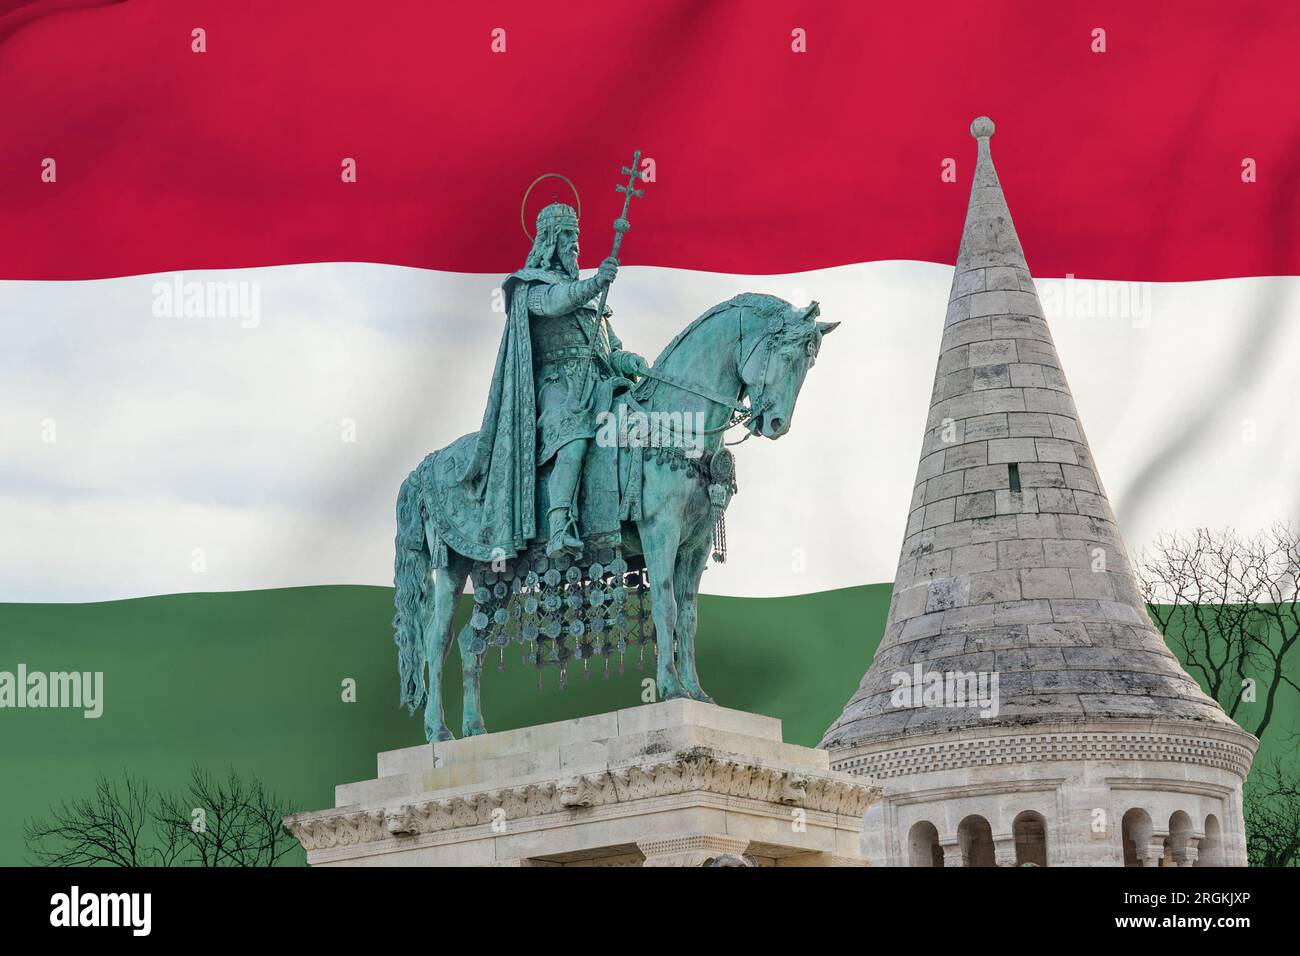 saint stephen szent istvan statue with hungarian flag design for august 20 hungarian national celebration . Stock Photo